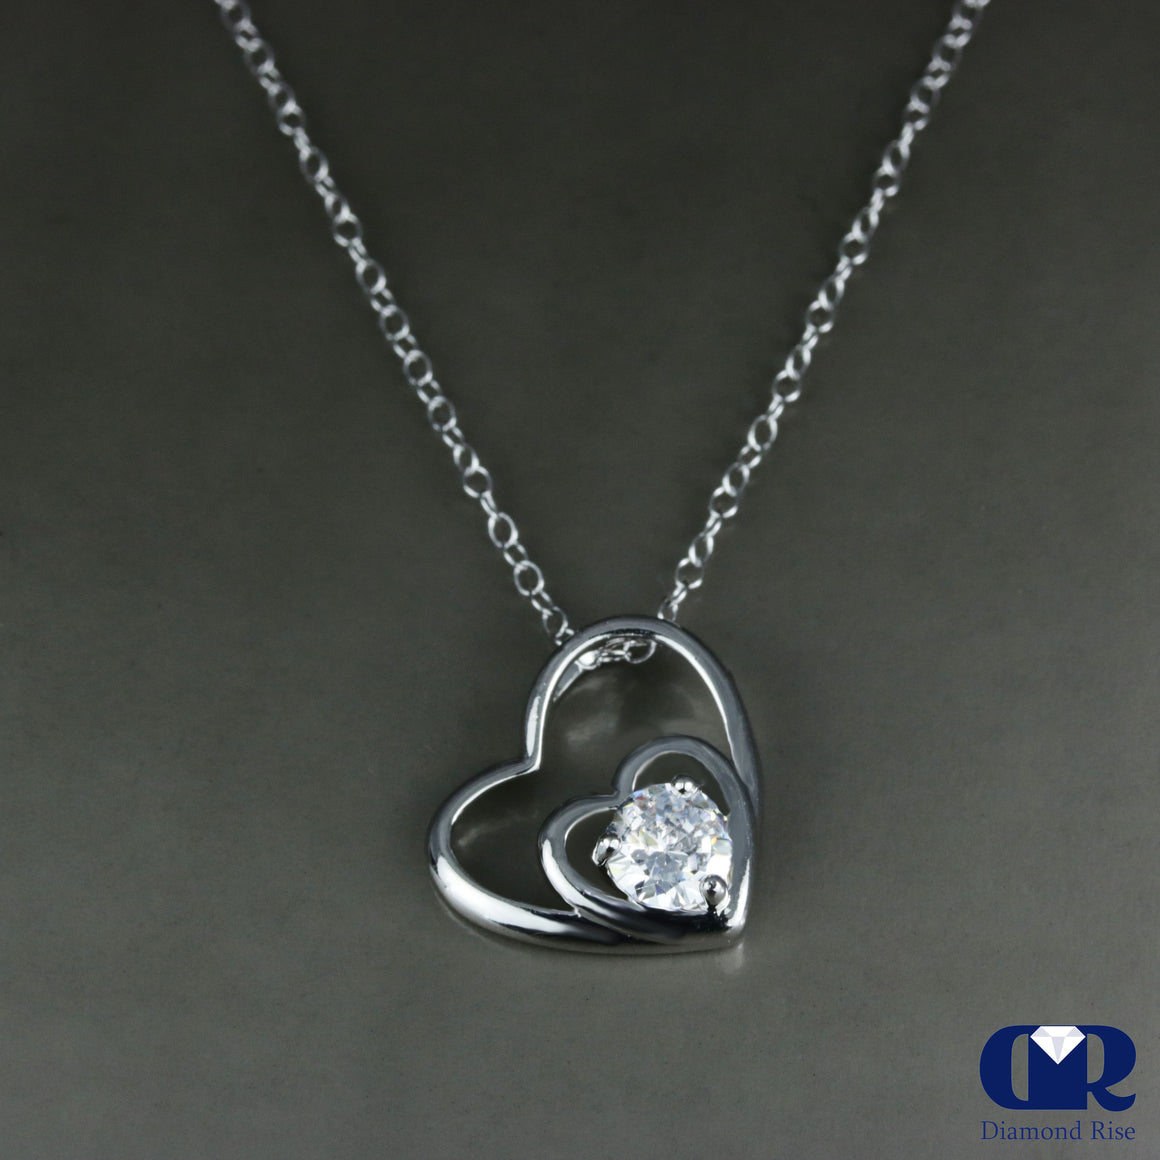 Double Open Solitaire Heart Diamond Pendant Necklace In 14K Gold - Diamond Rise Jewelry